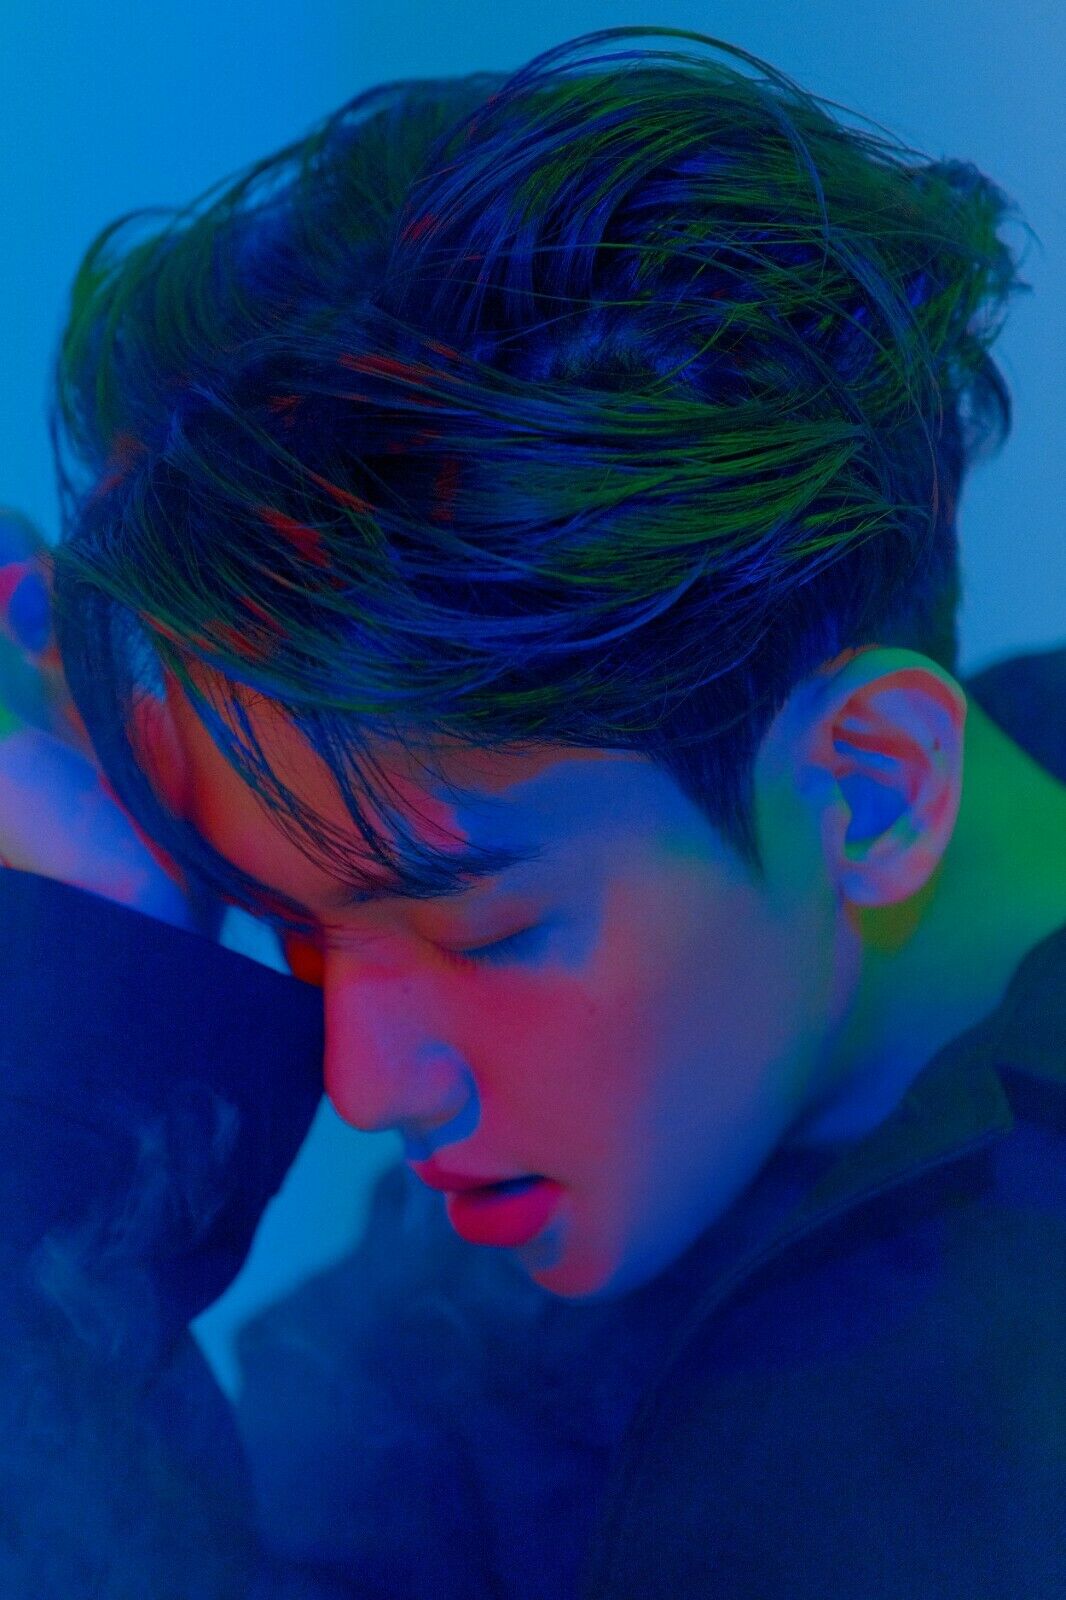 EXO BAEKHYUN, 2nd mini album 'Delight' released on May 25th! A total of 7 songs with various atmospheres included! EXO's B...